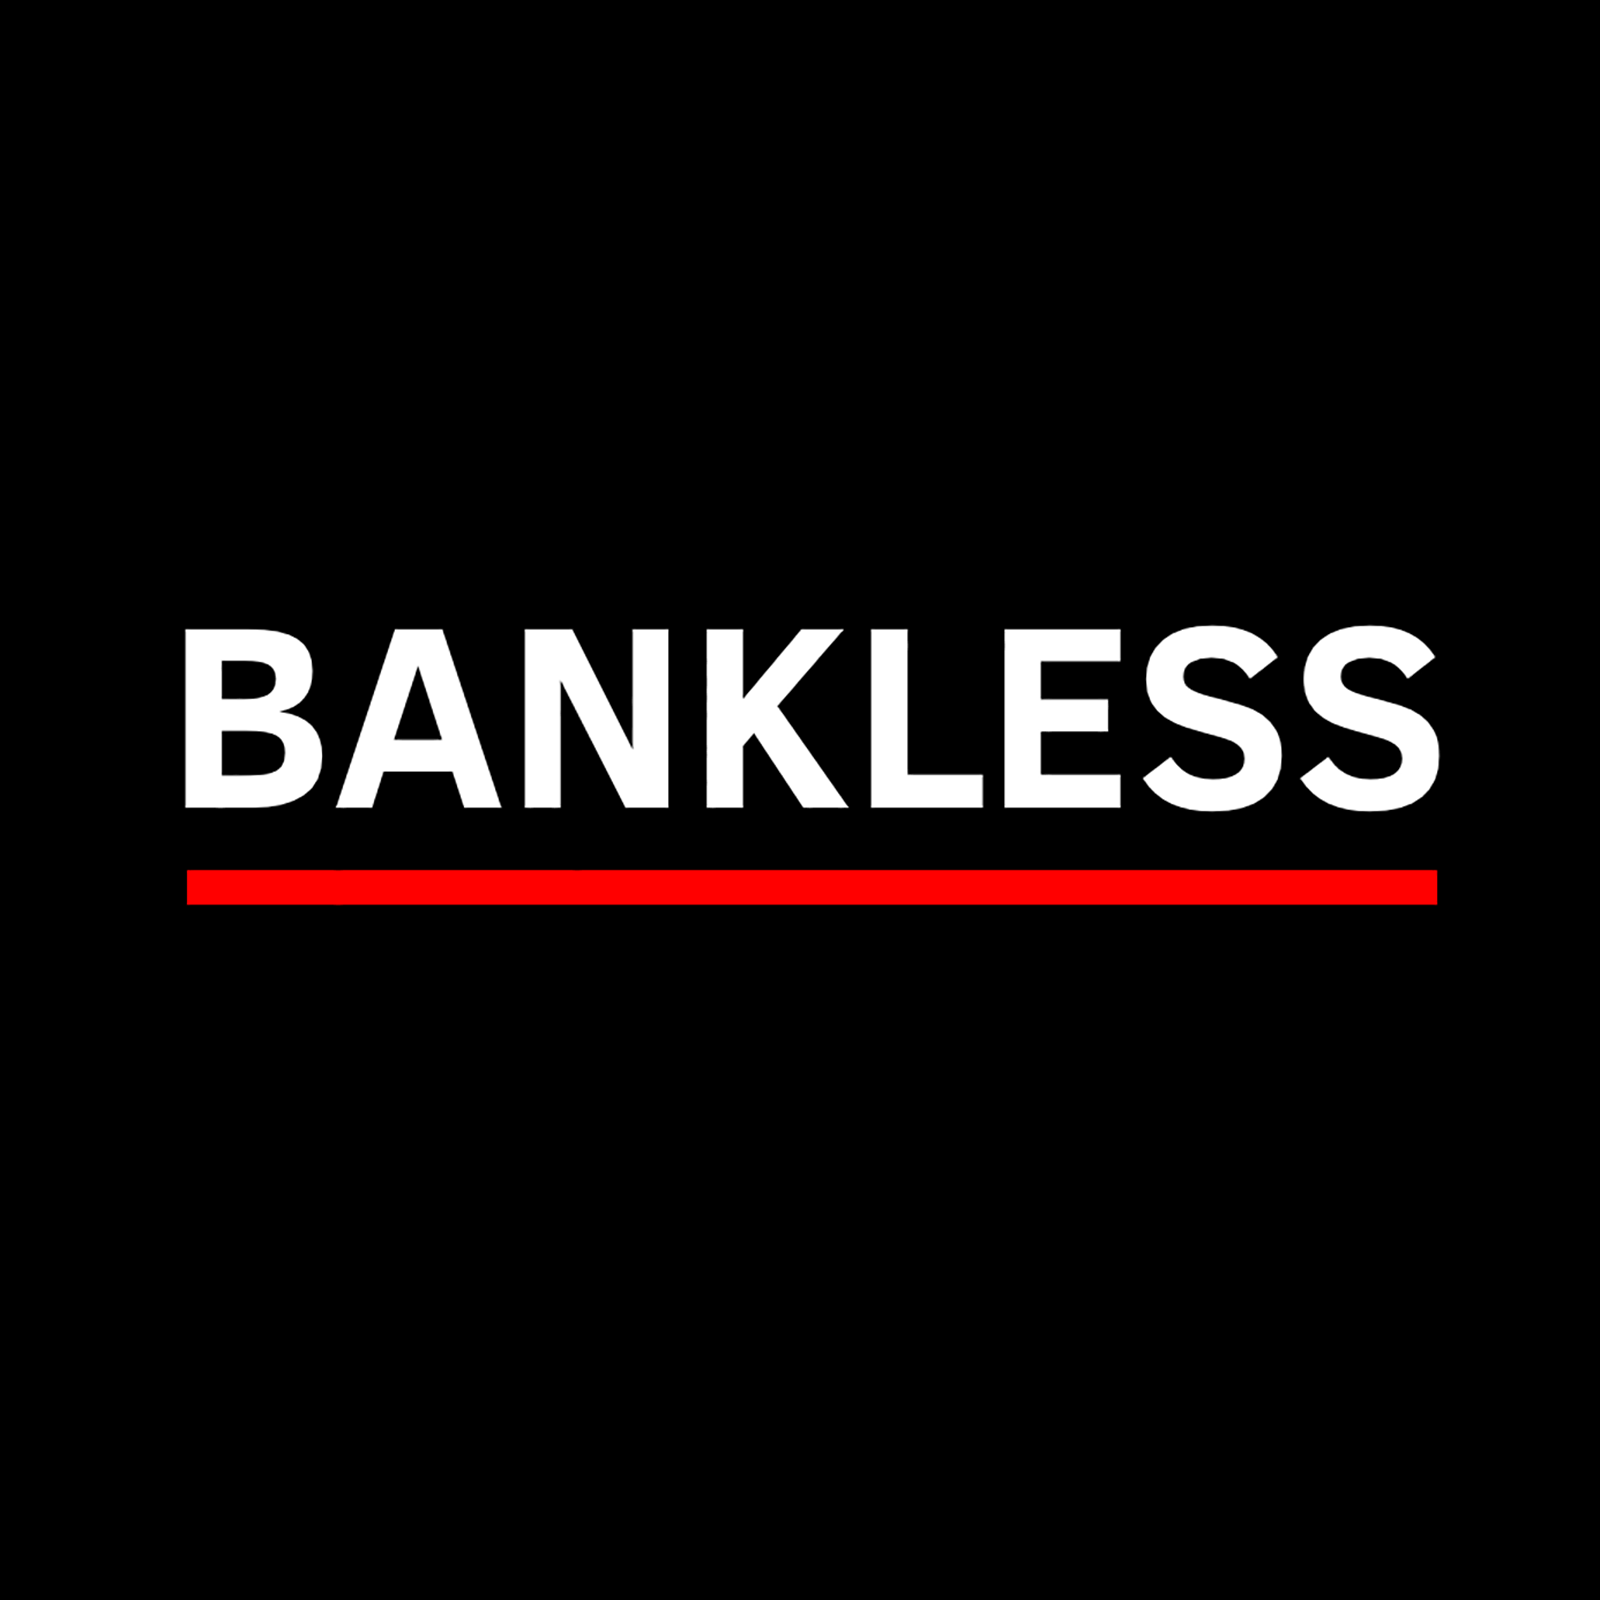 Fresh update on "seven percent" discussed on Bankless